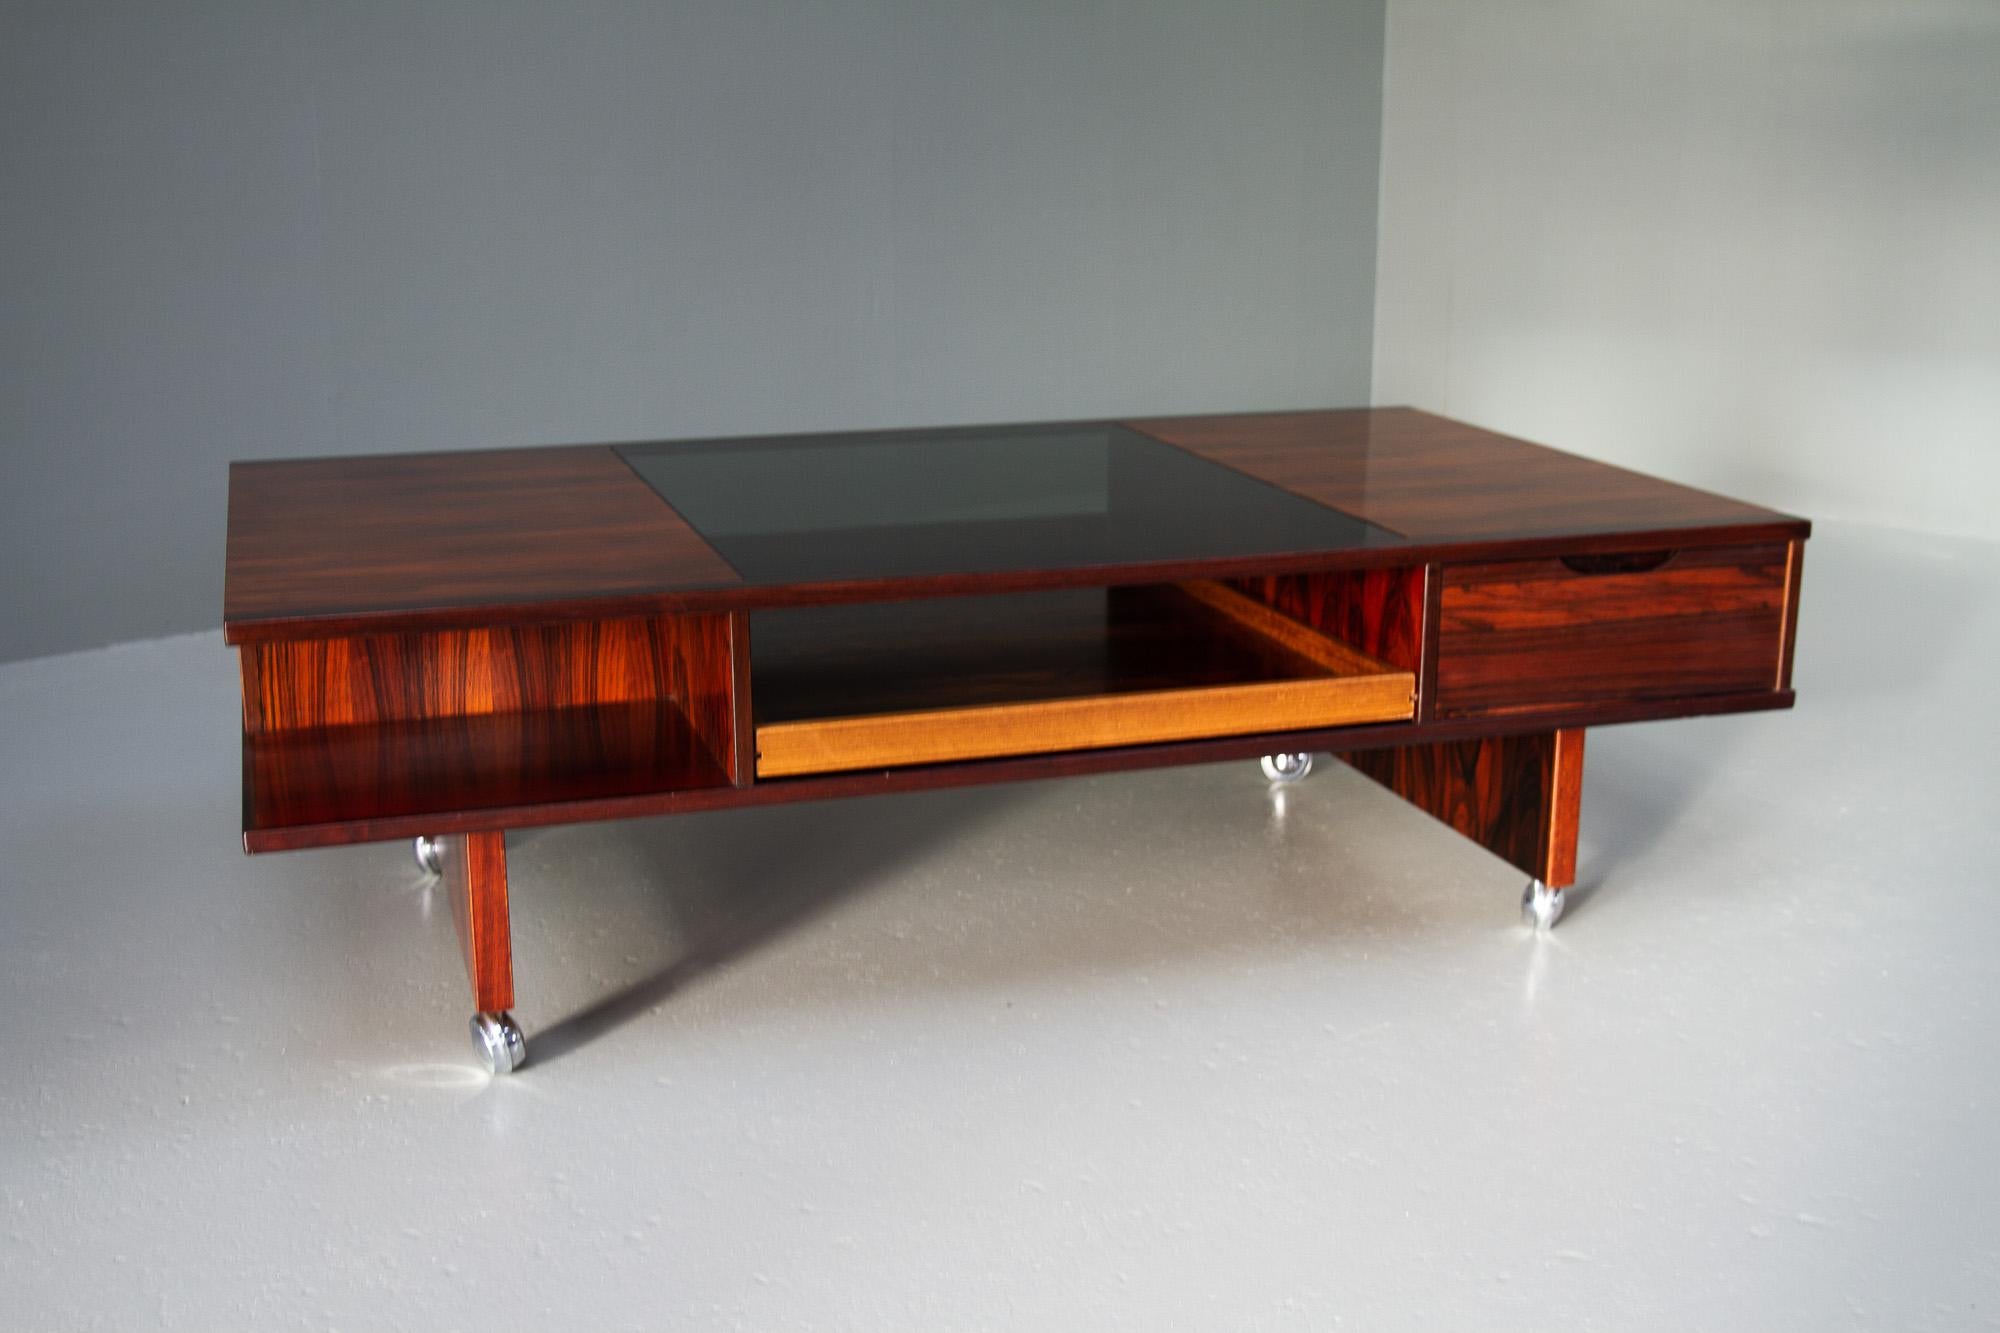 Vintage Danish rosewood coffee table, 1960s.
Stunning and rare Danish Rosewood coffee table with very expressive grain pattern. Low and sleek design with a cubistic profile. Exquisite design and materials. The design will suit long and low sofas as